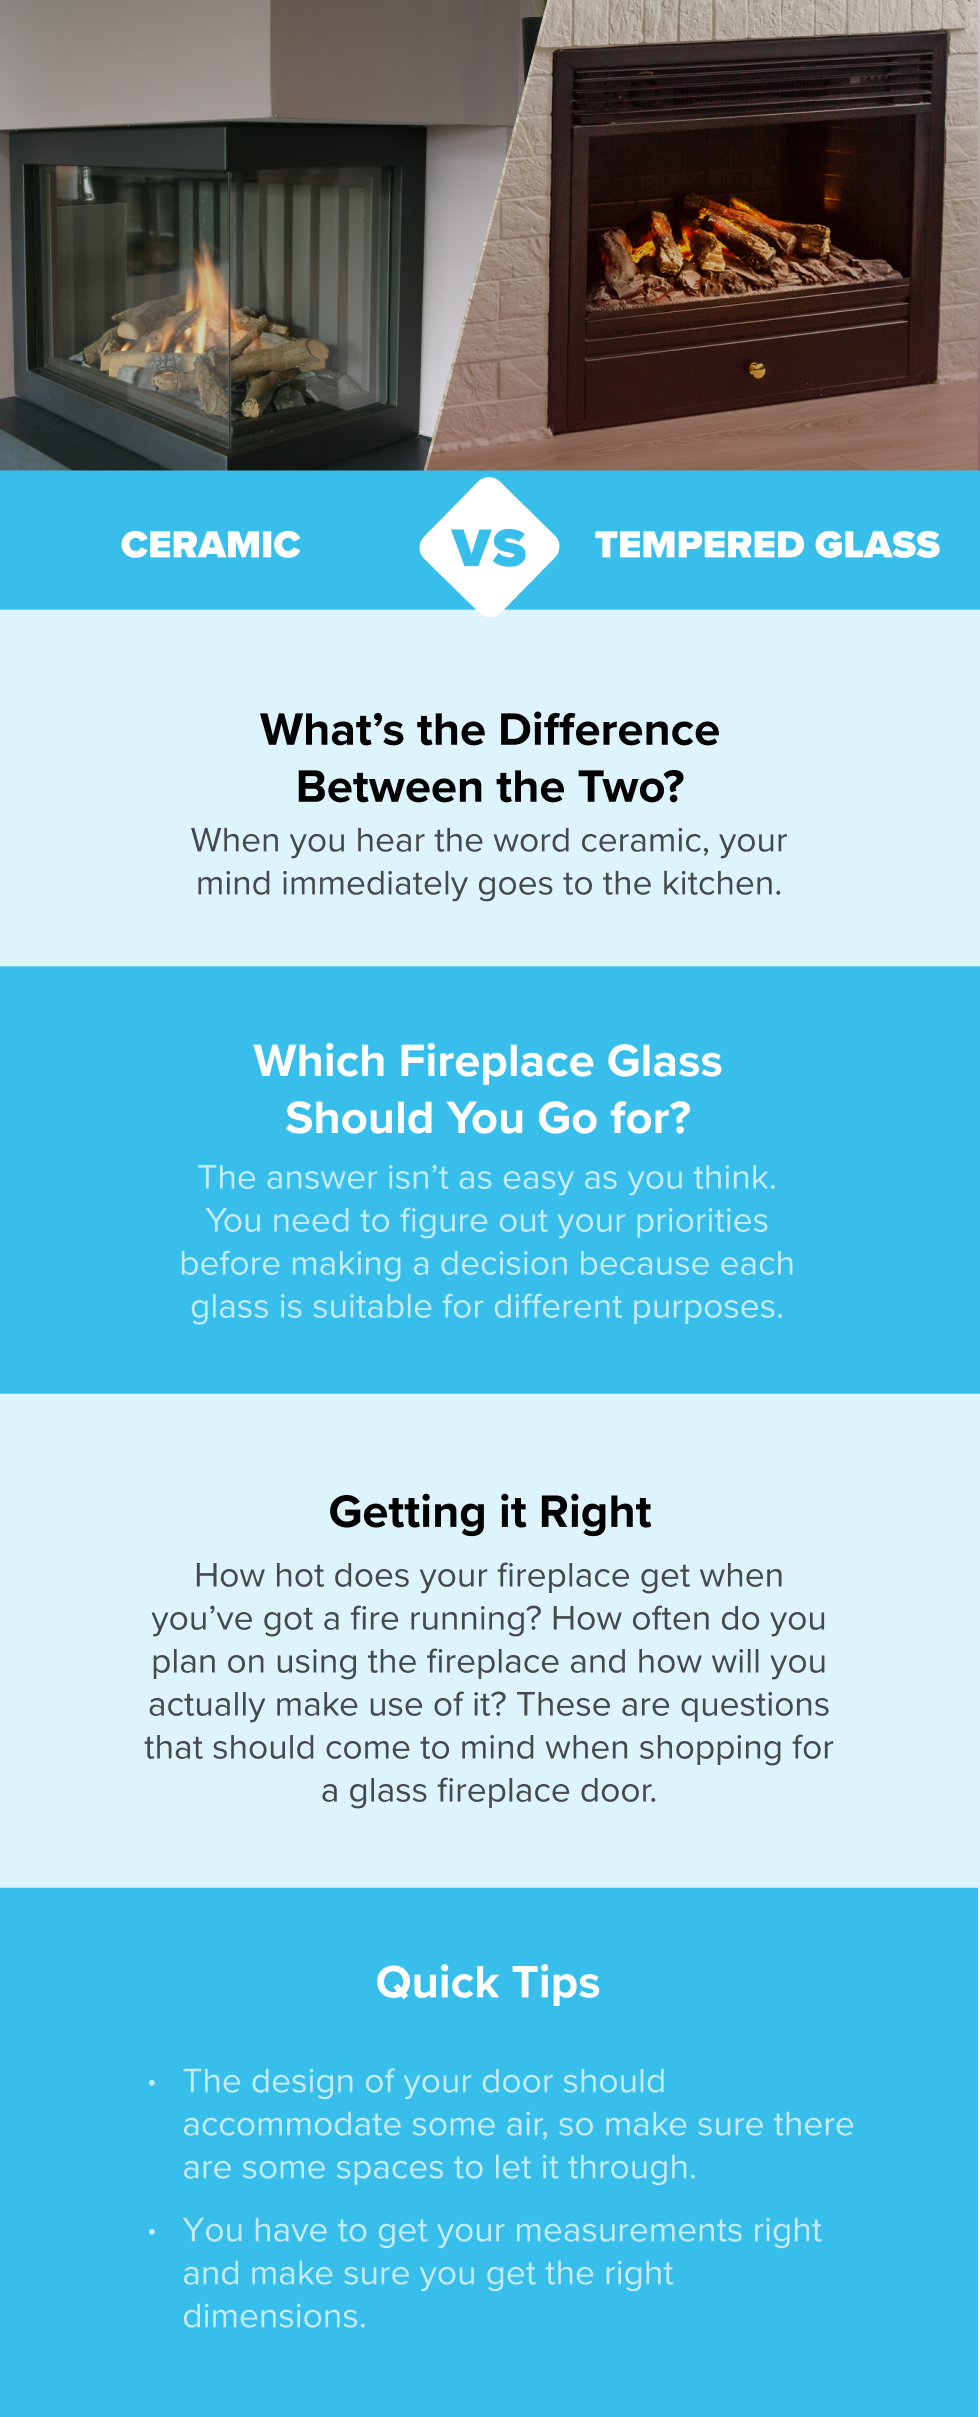 Ceramic vs Tempered Glass Fireplace Infographic